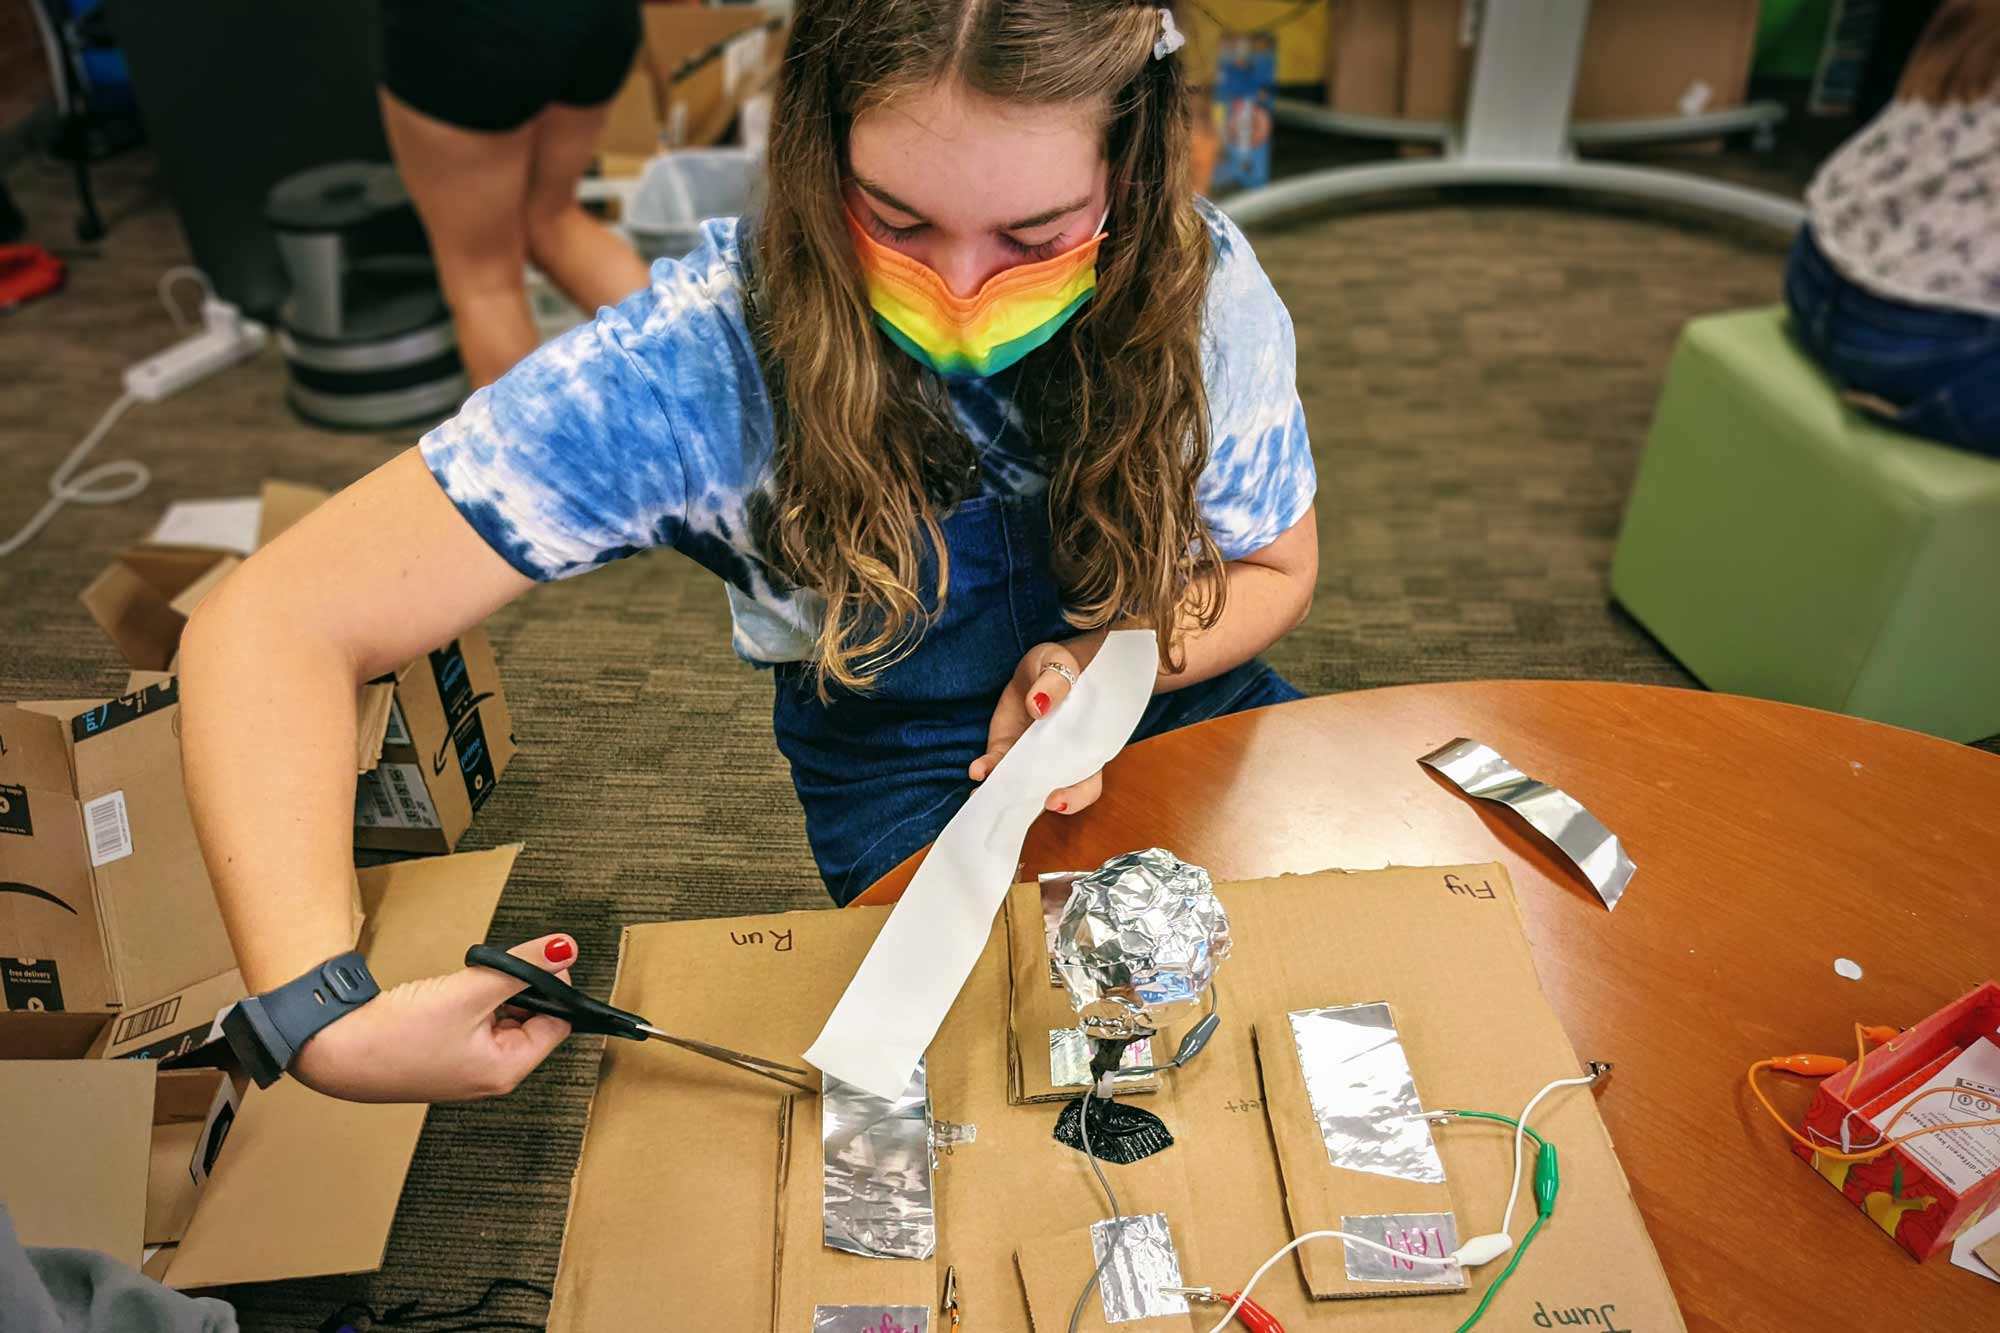 A girl in a rainbow mask cuts a strip of aluminum foil attached to a cardboard contraption